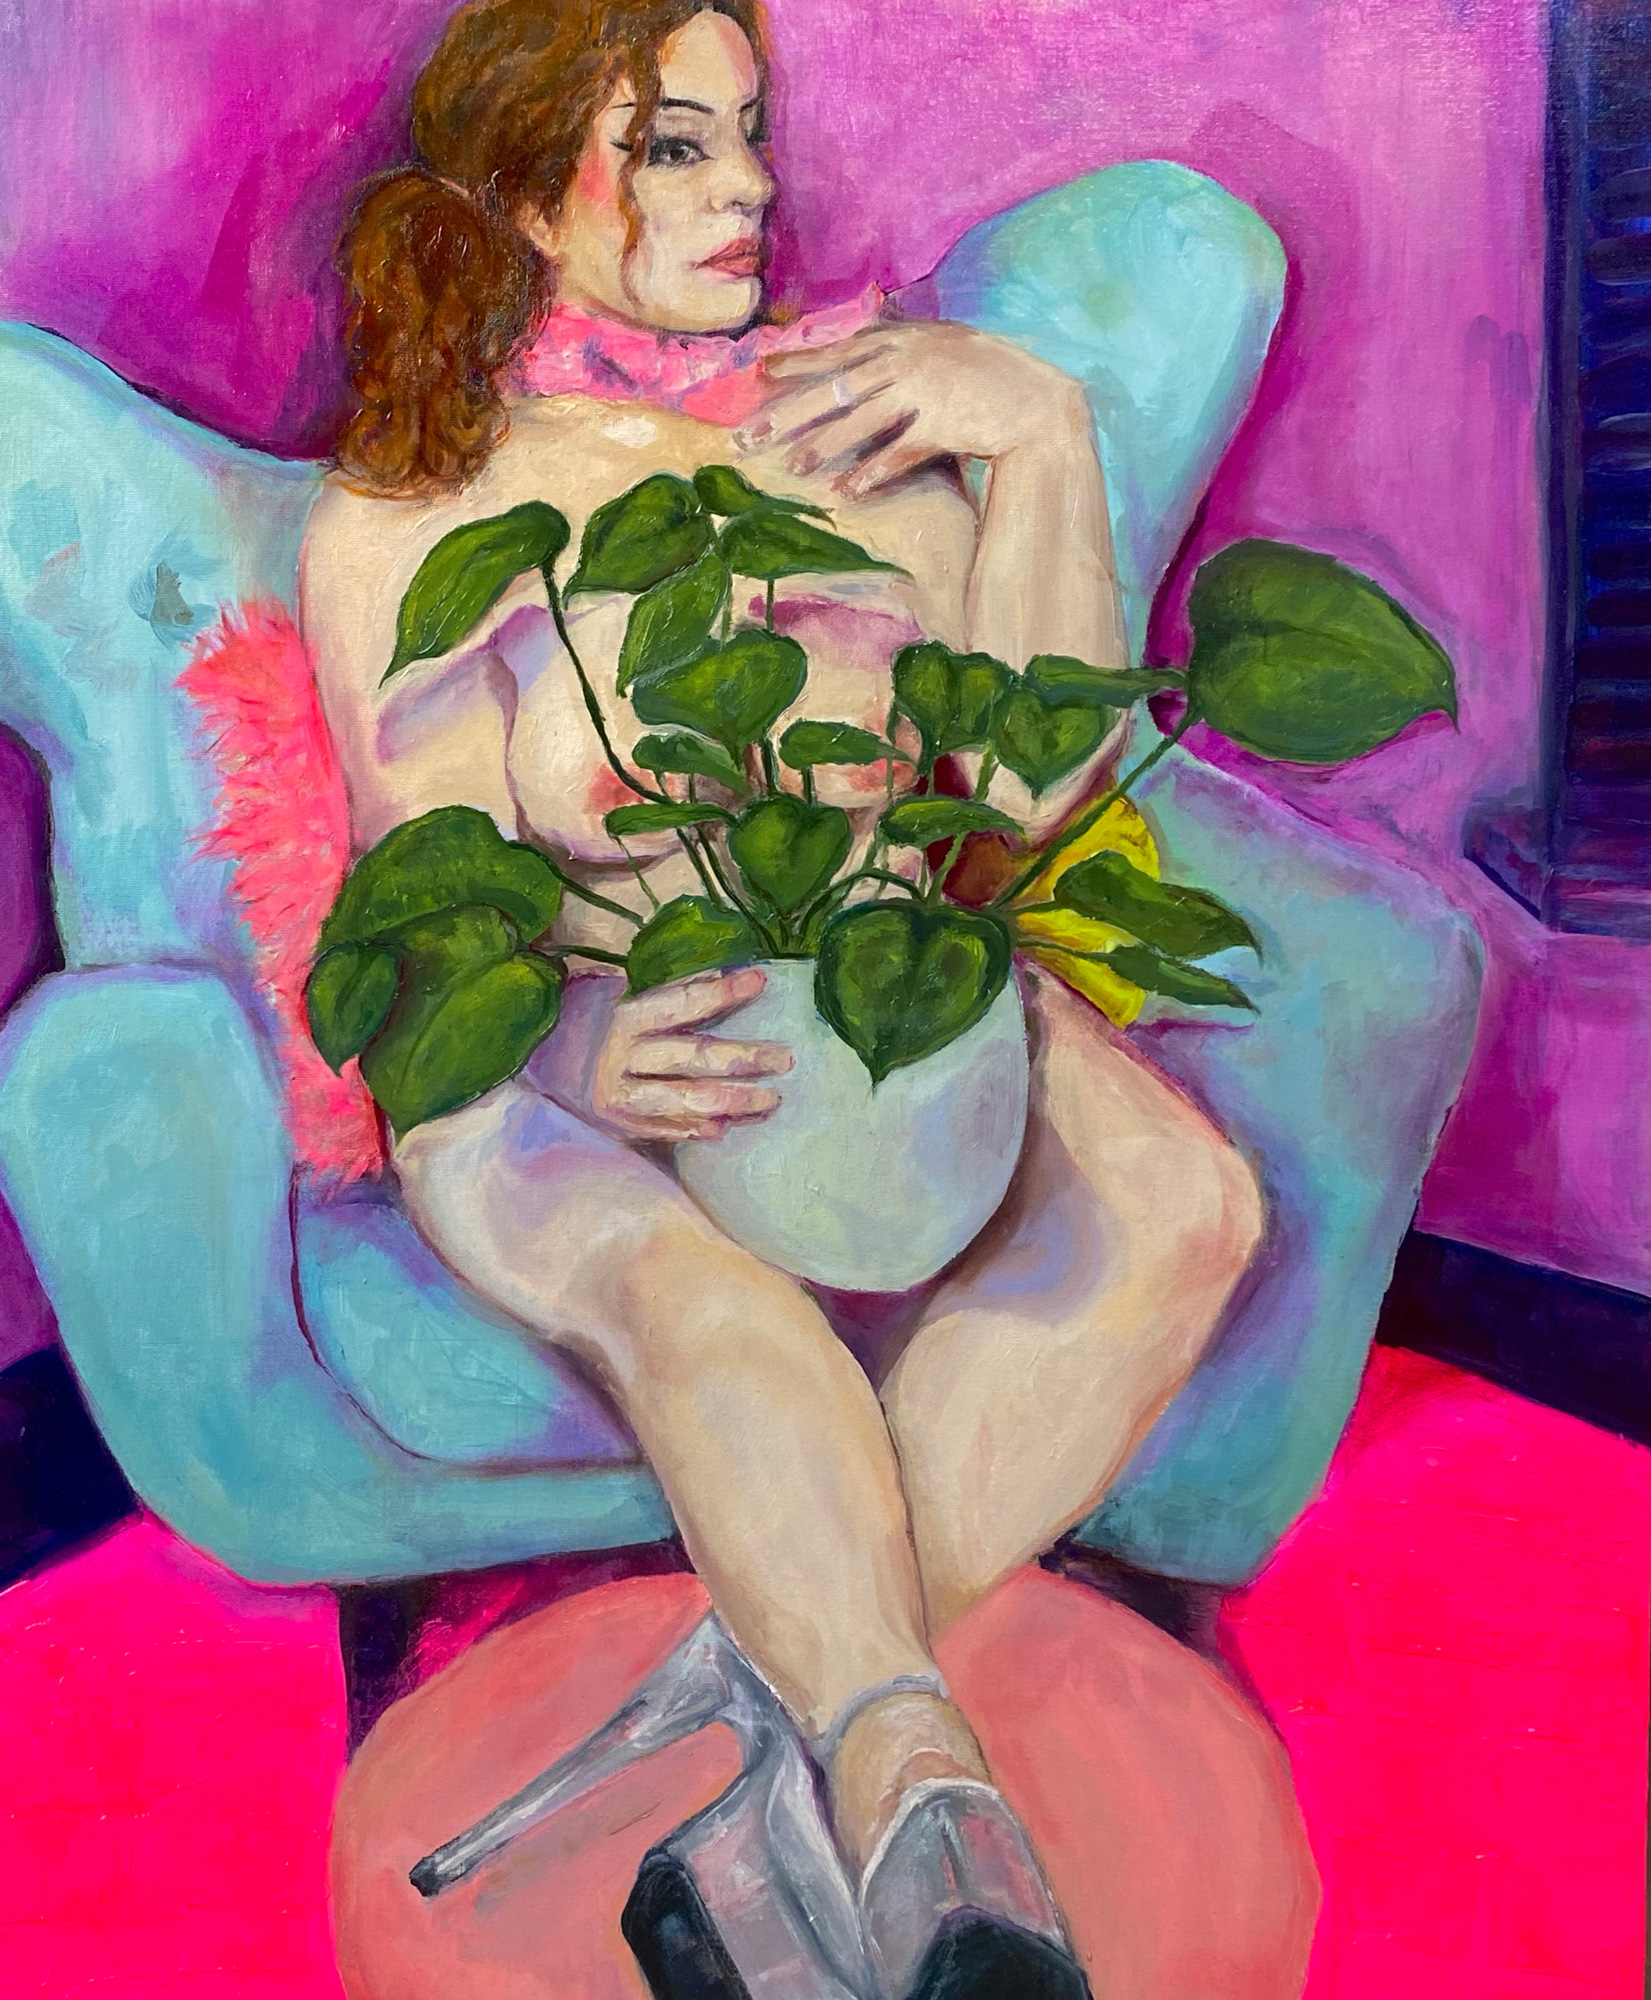 Painting of a person sitting in a chair holding a plant